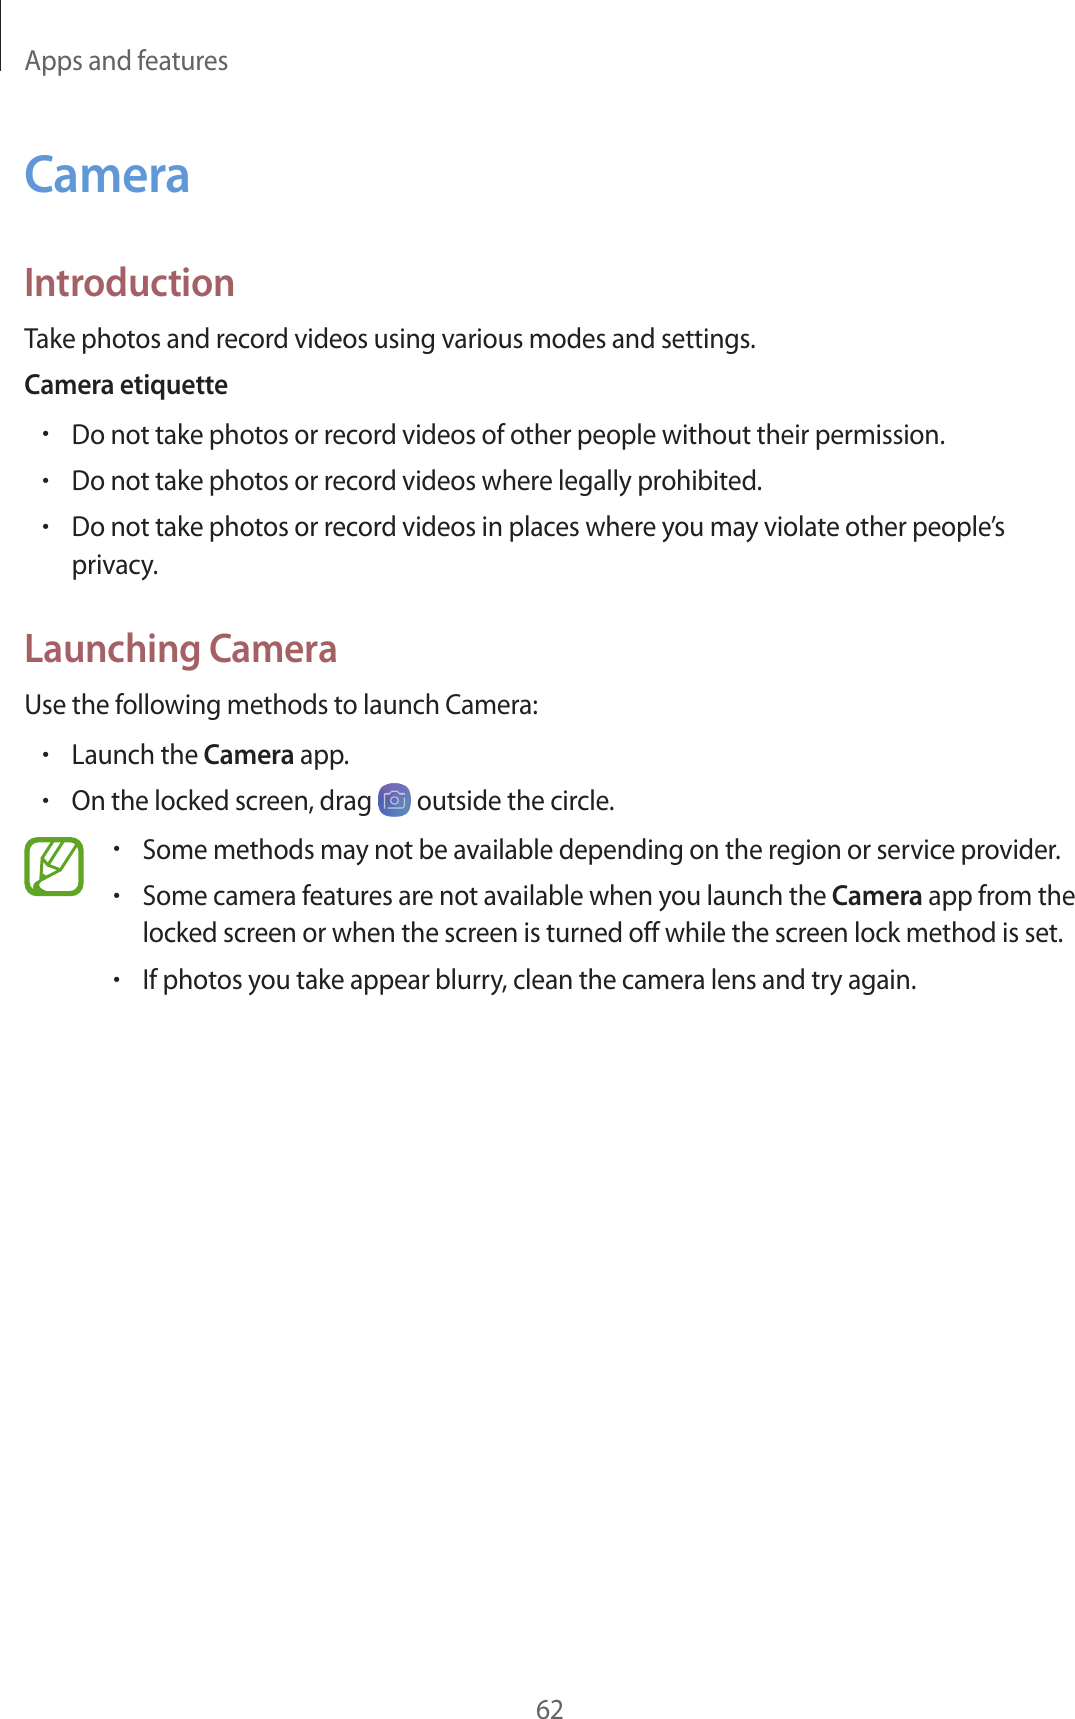 Apps and features62CameraIntroductionTake photos and record videos using various modes and settings.Camera etiquette•Do not take photos or record videos of other people without their permission.•Do not take photos or record videos where legally prohibited.•Do not take photos or record videos in places where you may violate other people’s privacy.Launching CameraUse the following methods to launch Camera:•Launch the Camera app.•On the locked screen, drag   outside the circle.•Some methods may not be available depending on the region or service provider.•Some camera features are not available when you launch the Camera app from the locked screen or when the screen is turned off while the screen lock method is set.•If photos you take appear blurry, clean the camera lens and try again.